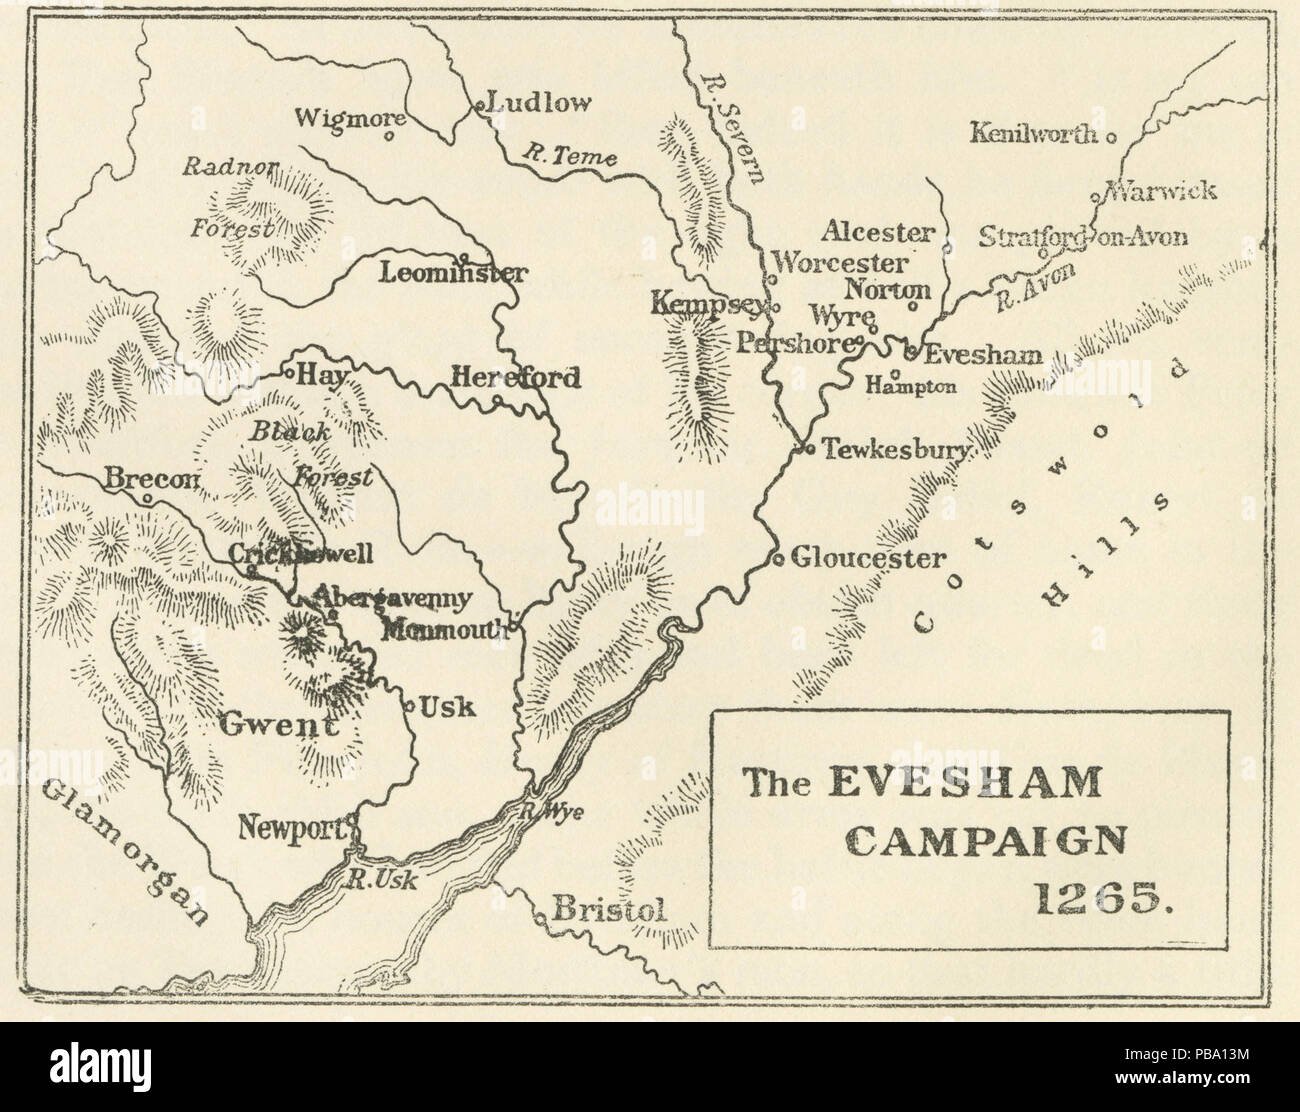 The Evesham Campaign map Stock Photo